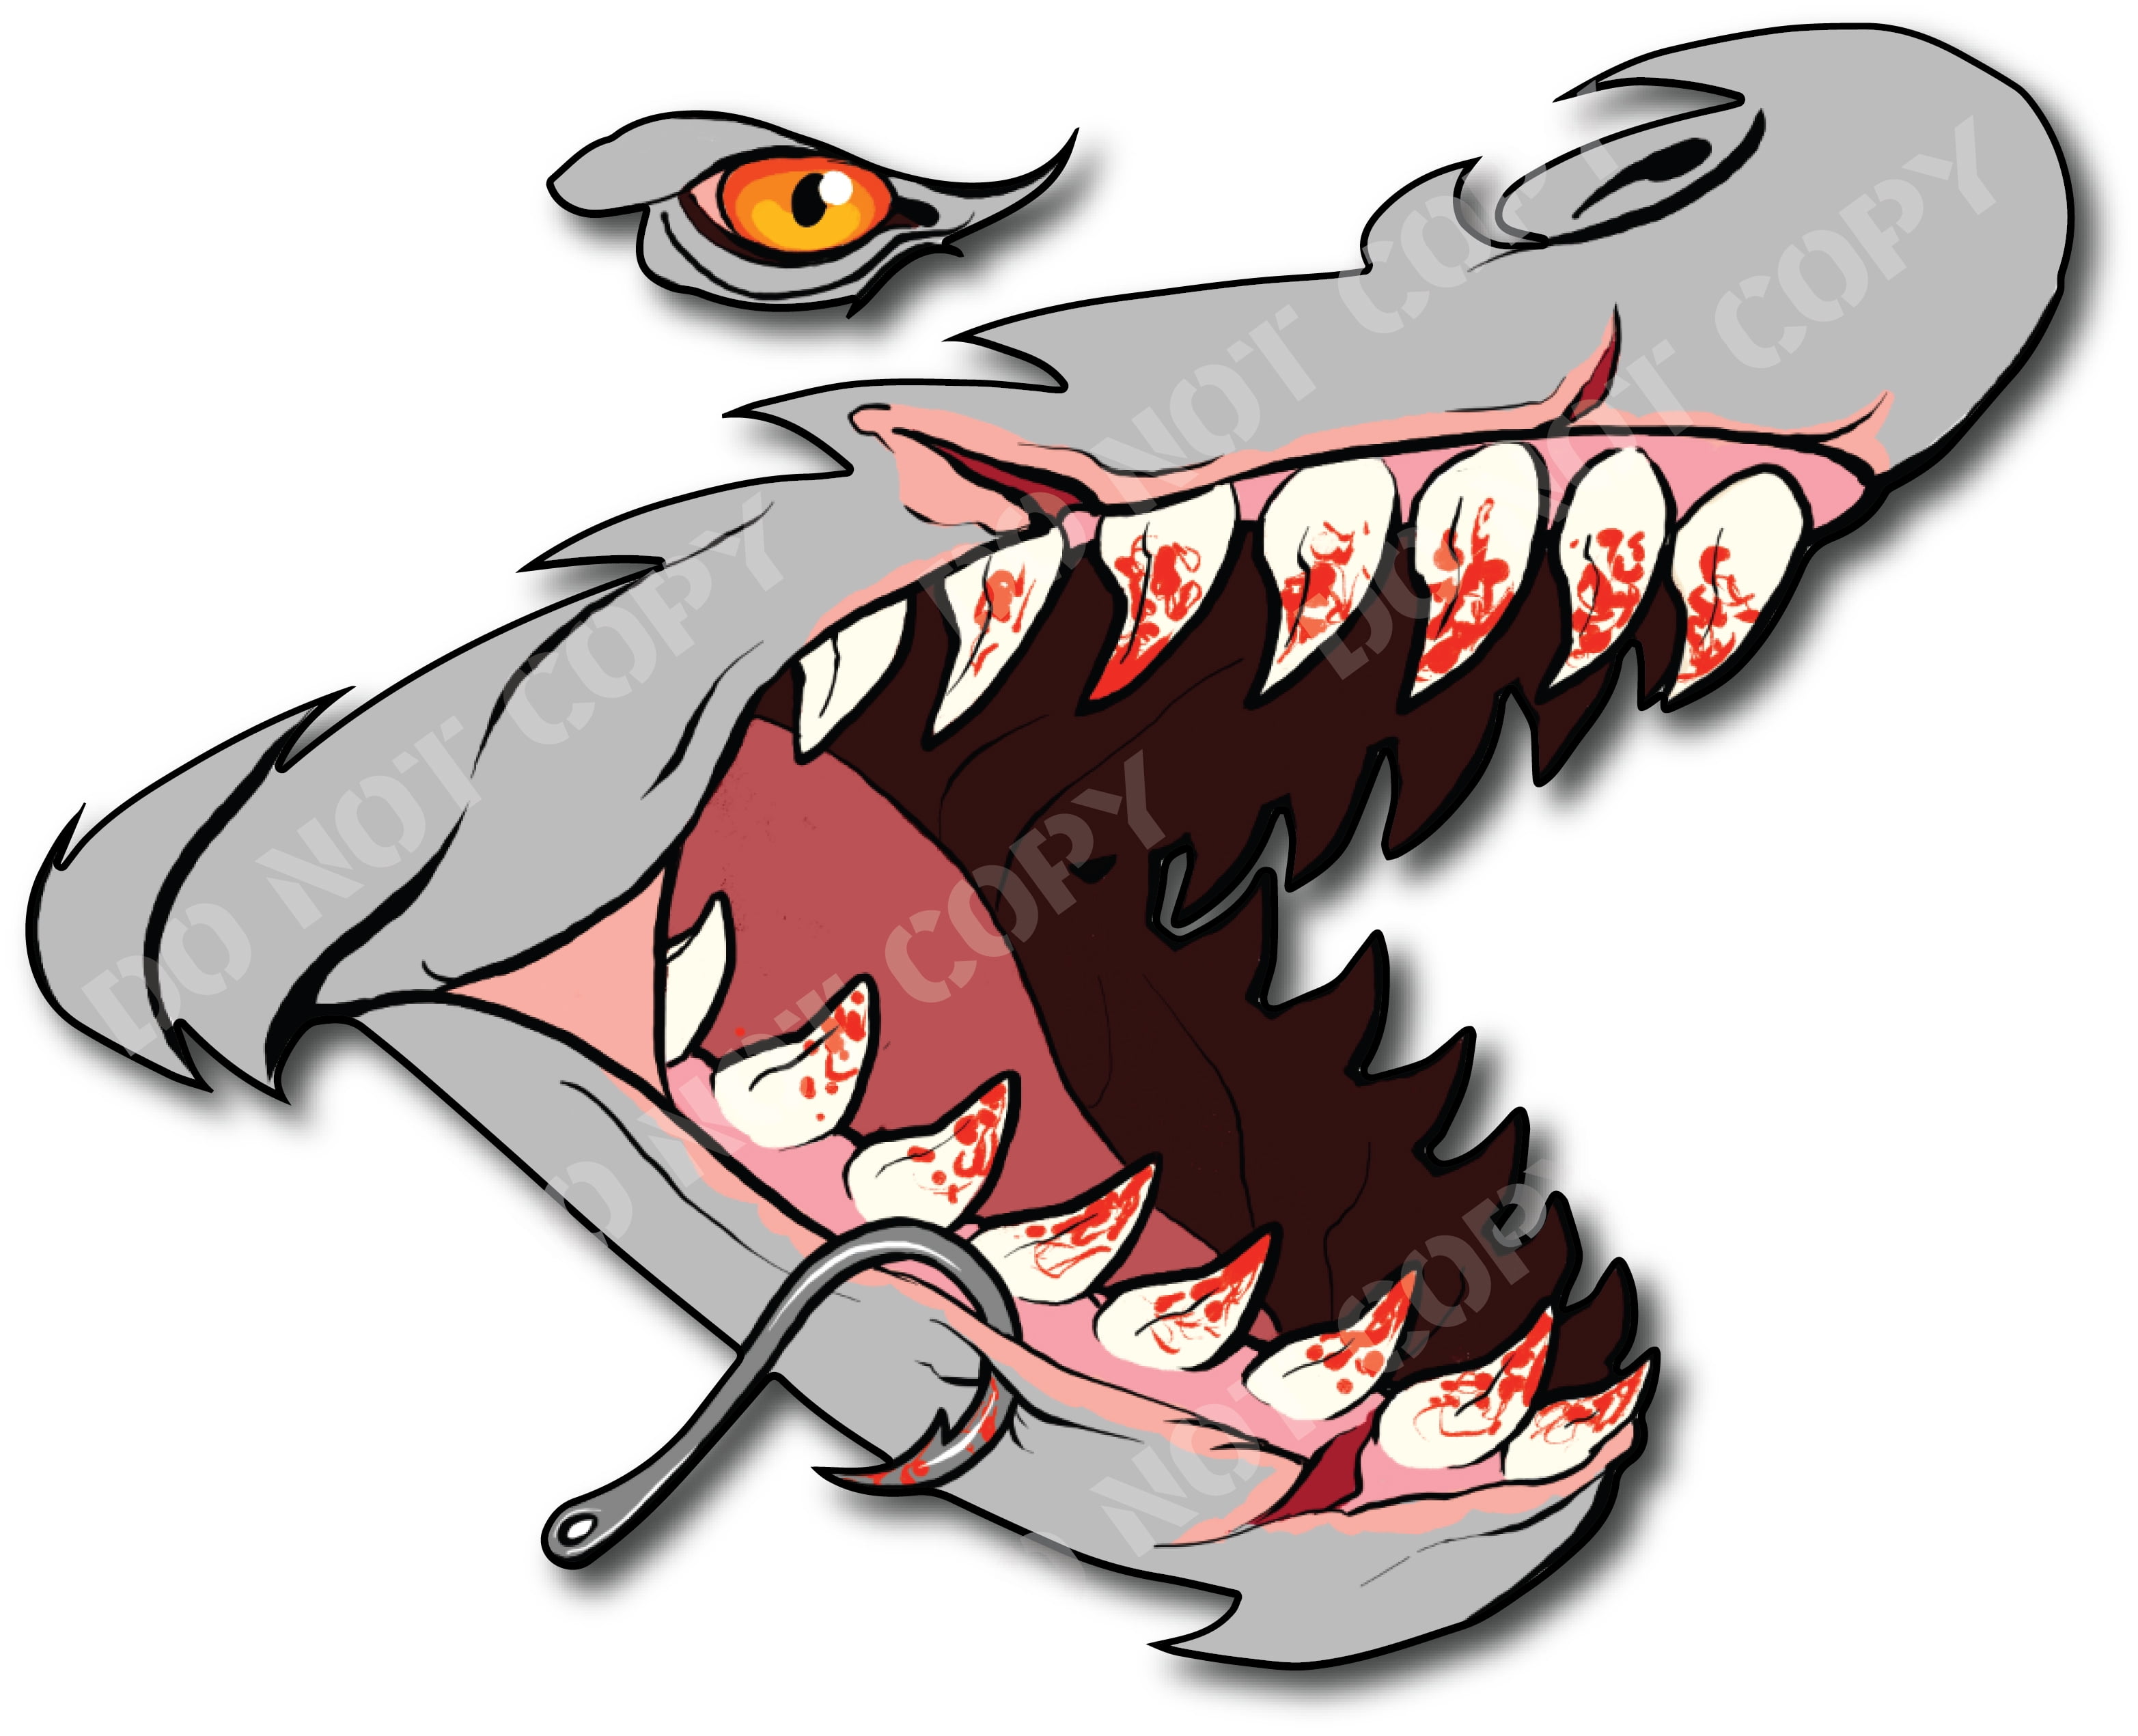 DECALS BY HALEY Shark Teeth Mouth Decal Sticker DIY Funny Graphics  Accessories for Car Kayak Canoe Fishing Boat Truck Jet Ski Hobie Dagger  Ocean Boat